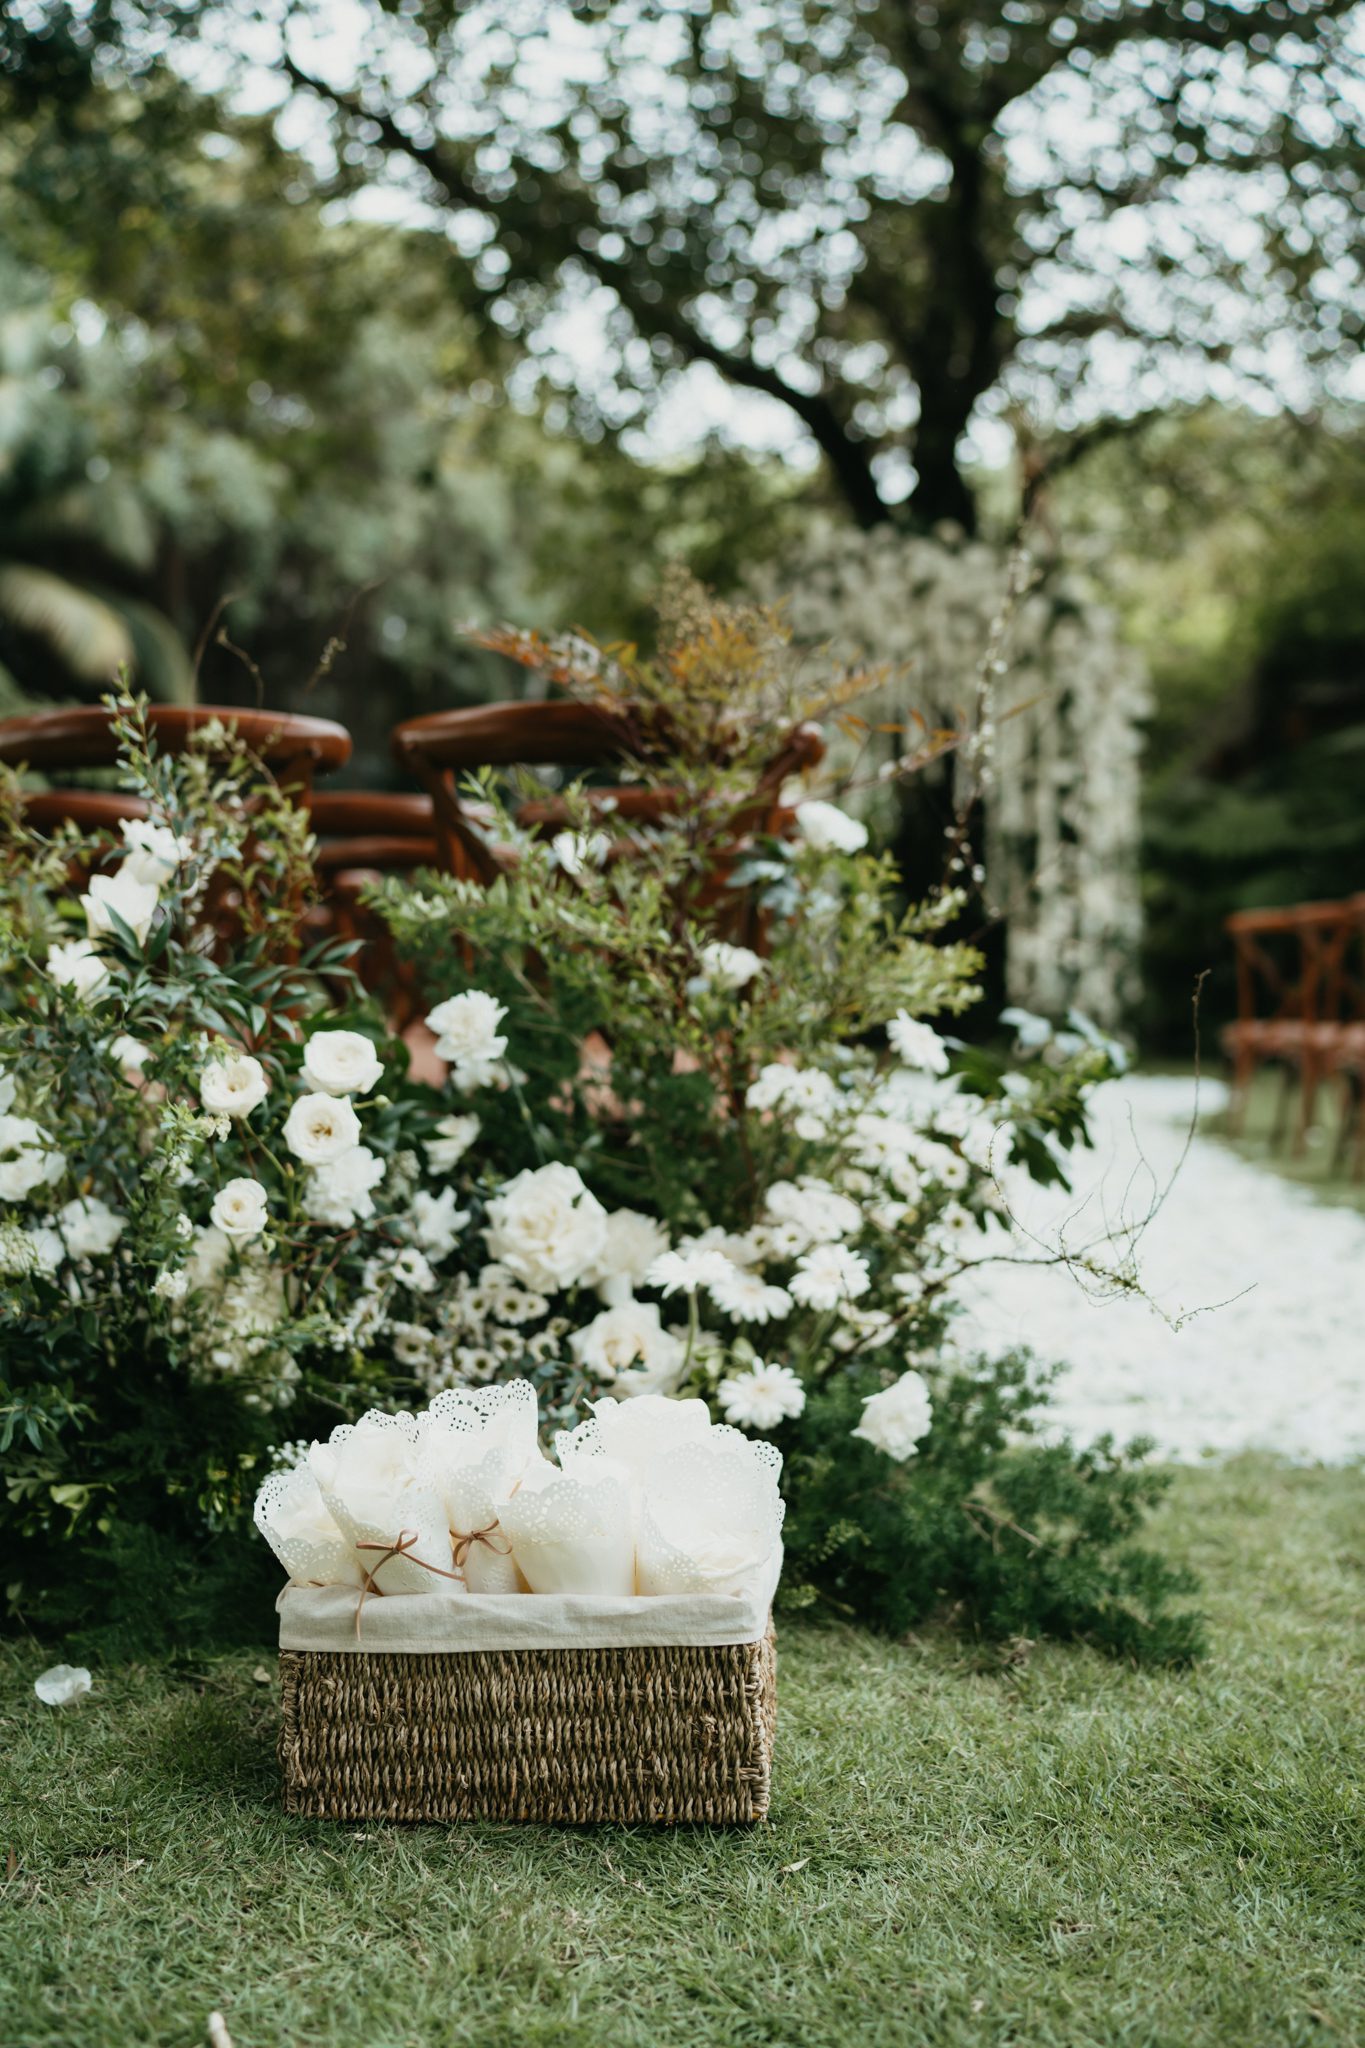 Saigon intimate wedding at An Lam Retreat 06930 - The Planners